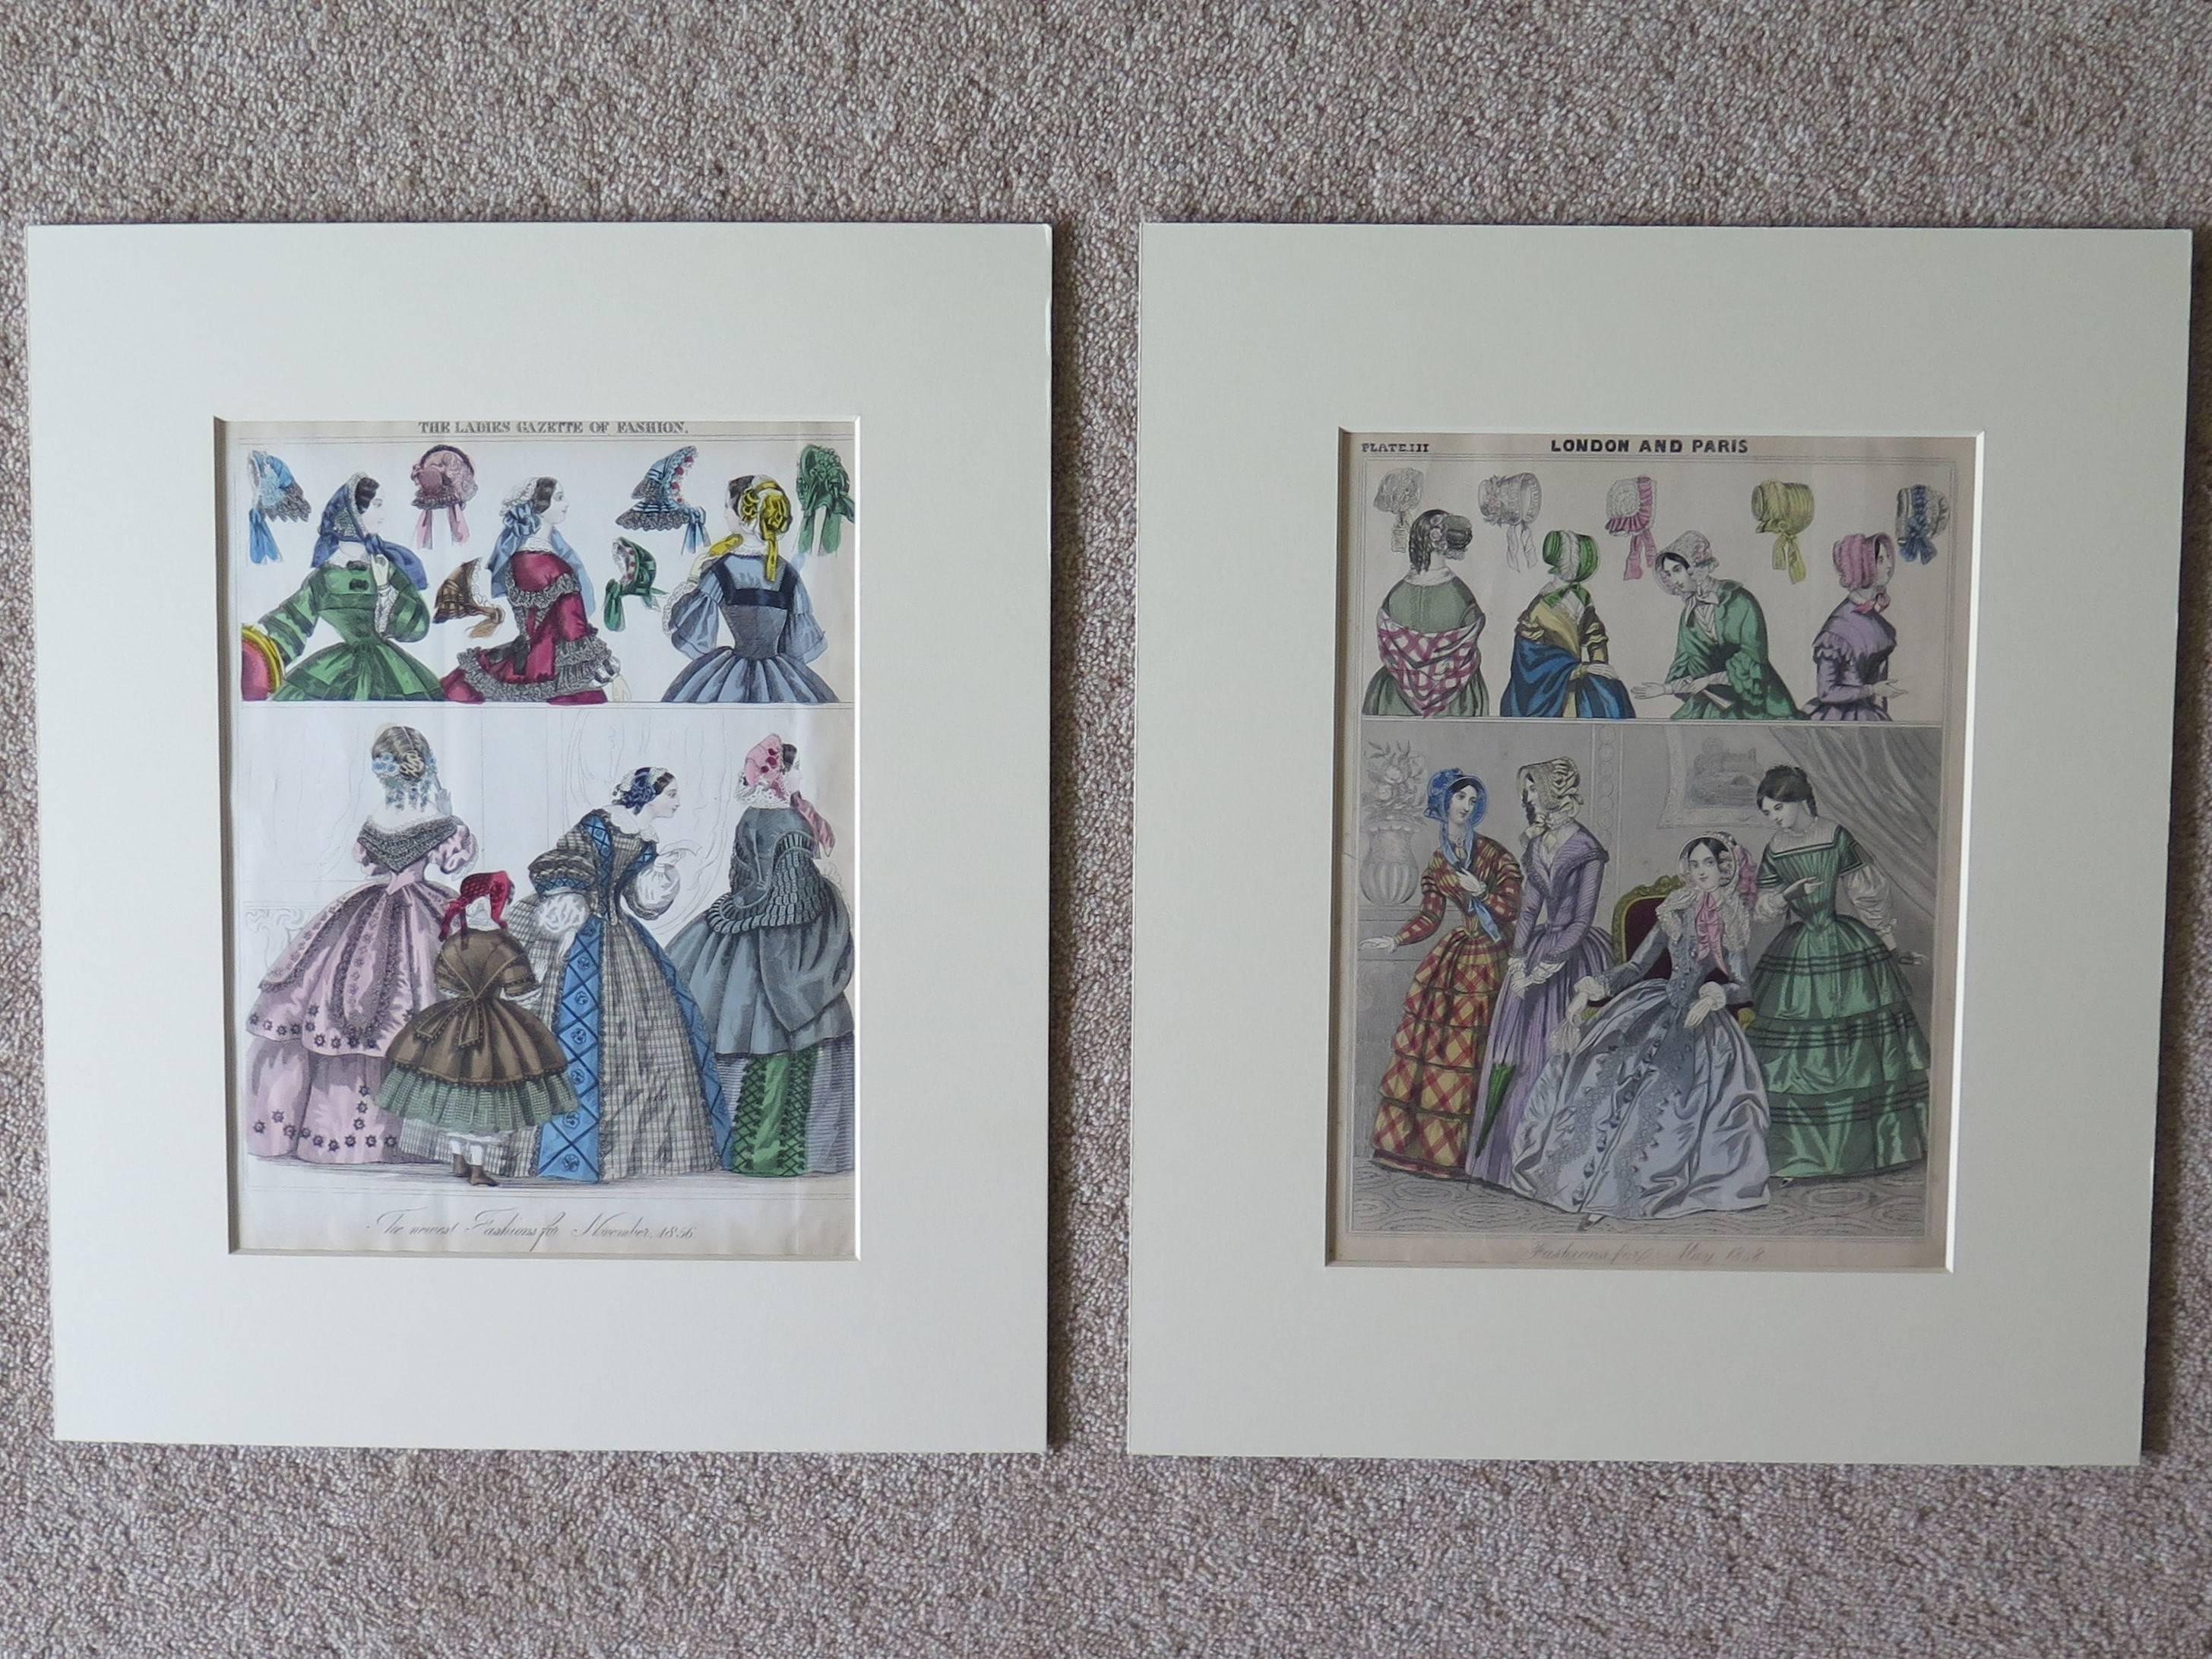 These are two very decorative colored and mounted fashion Prints of Victorian ladies fashion from 1848 and 1856, both individually mounted and ready to be framed.

Both prints show ladies and girls in different fashion dresses with hats from the